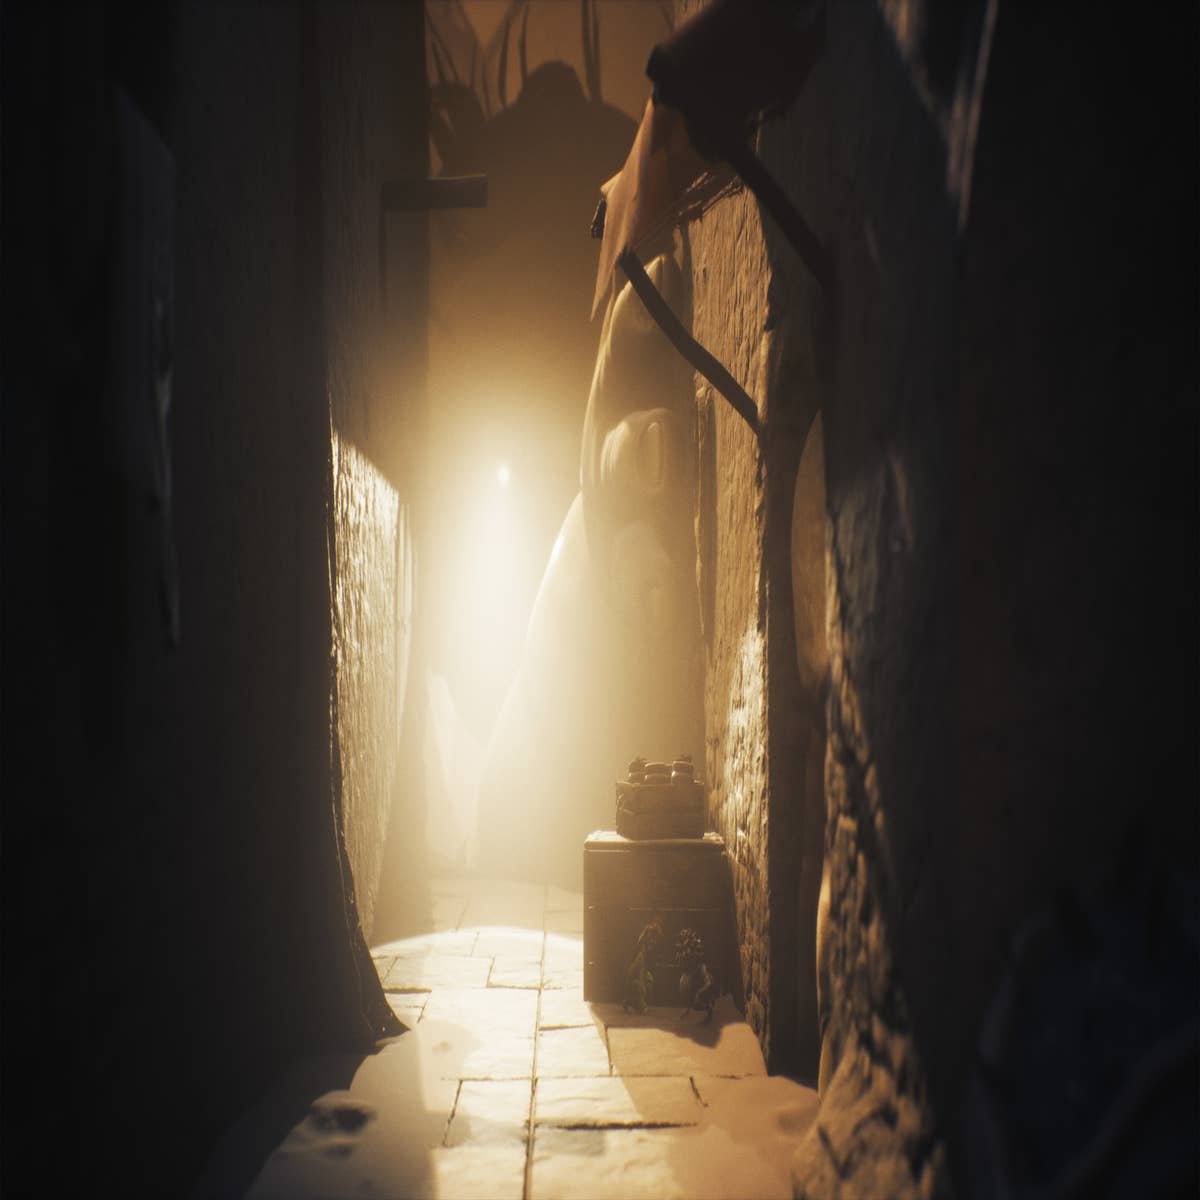 Little Nightmares 2: Is There Co-Op Multiplayer? Answered